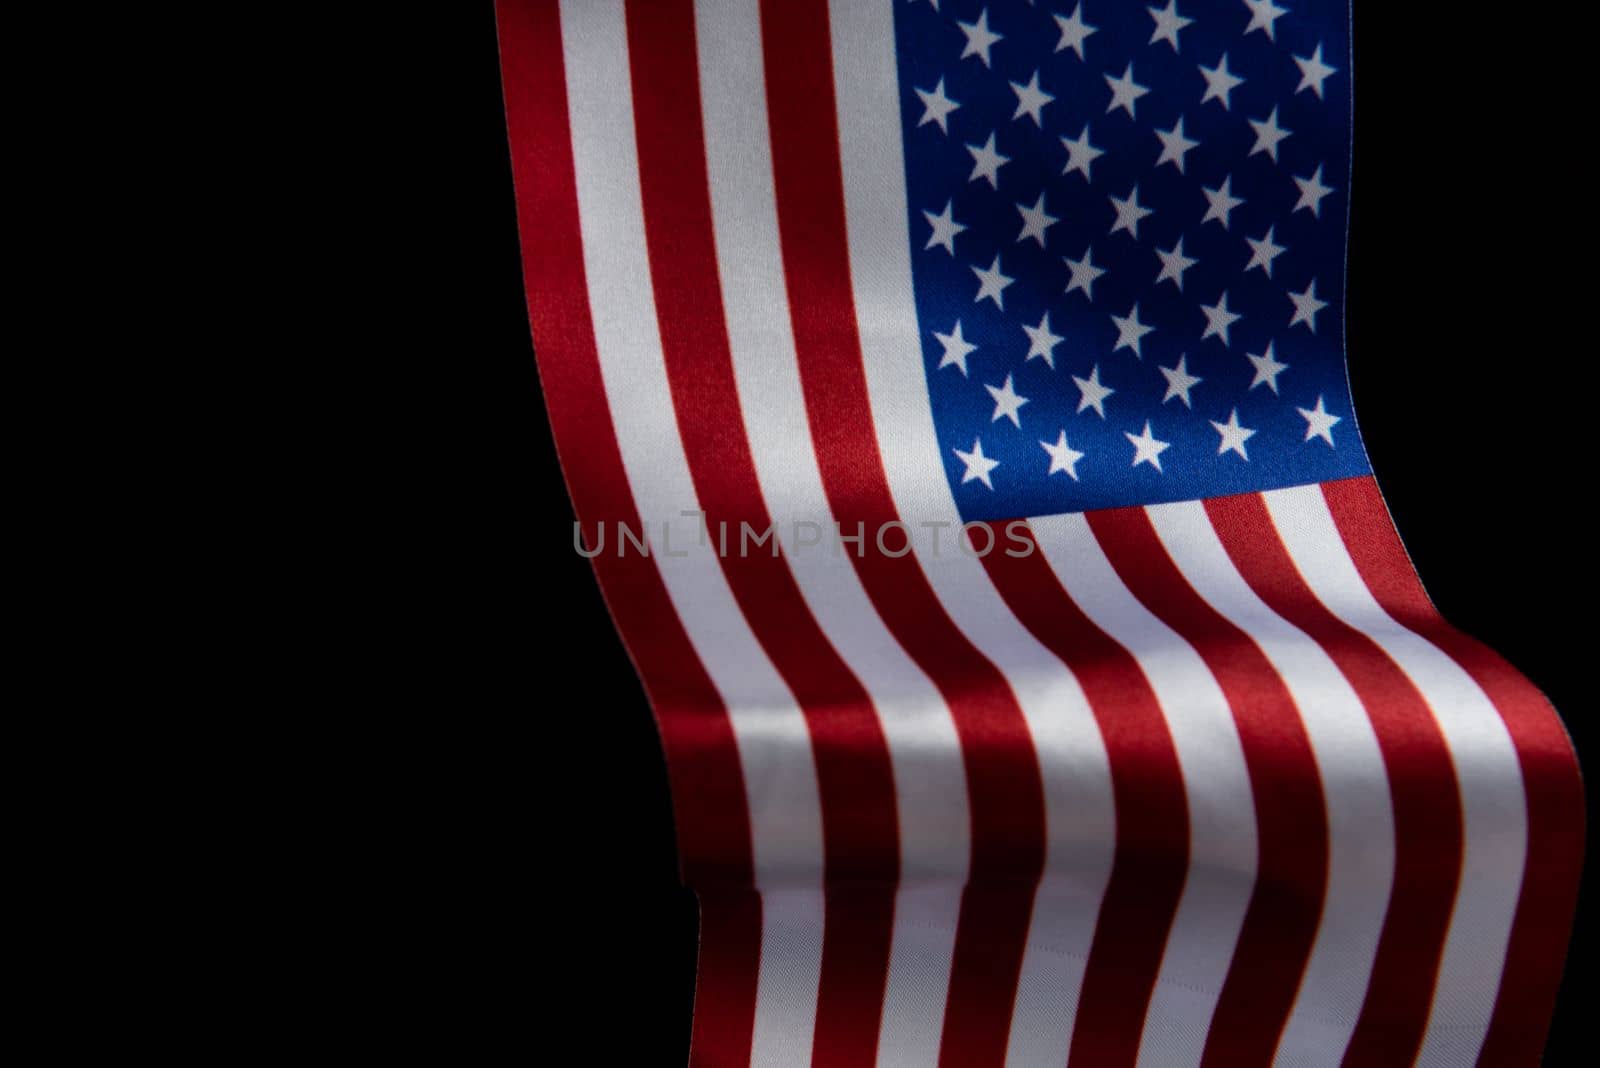 The U.S. flag is developing in the wind against a dark background. Isolate by gulyaevstudio